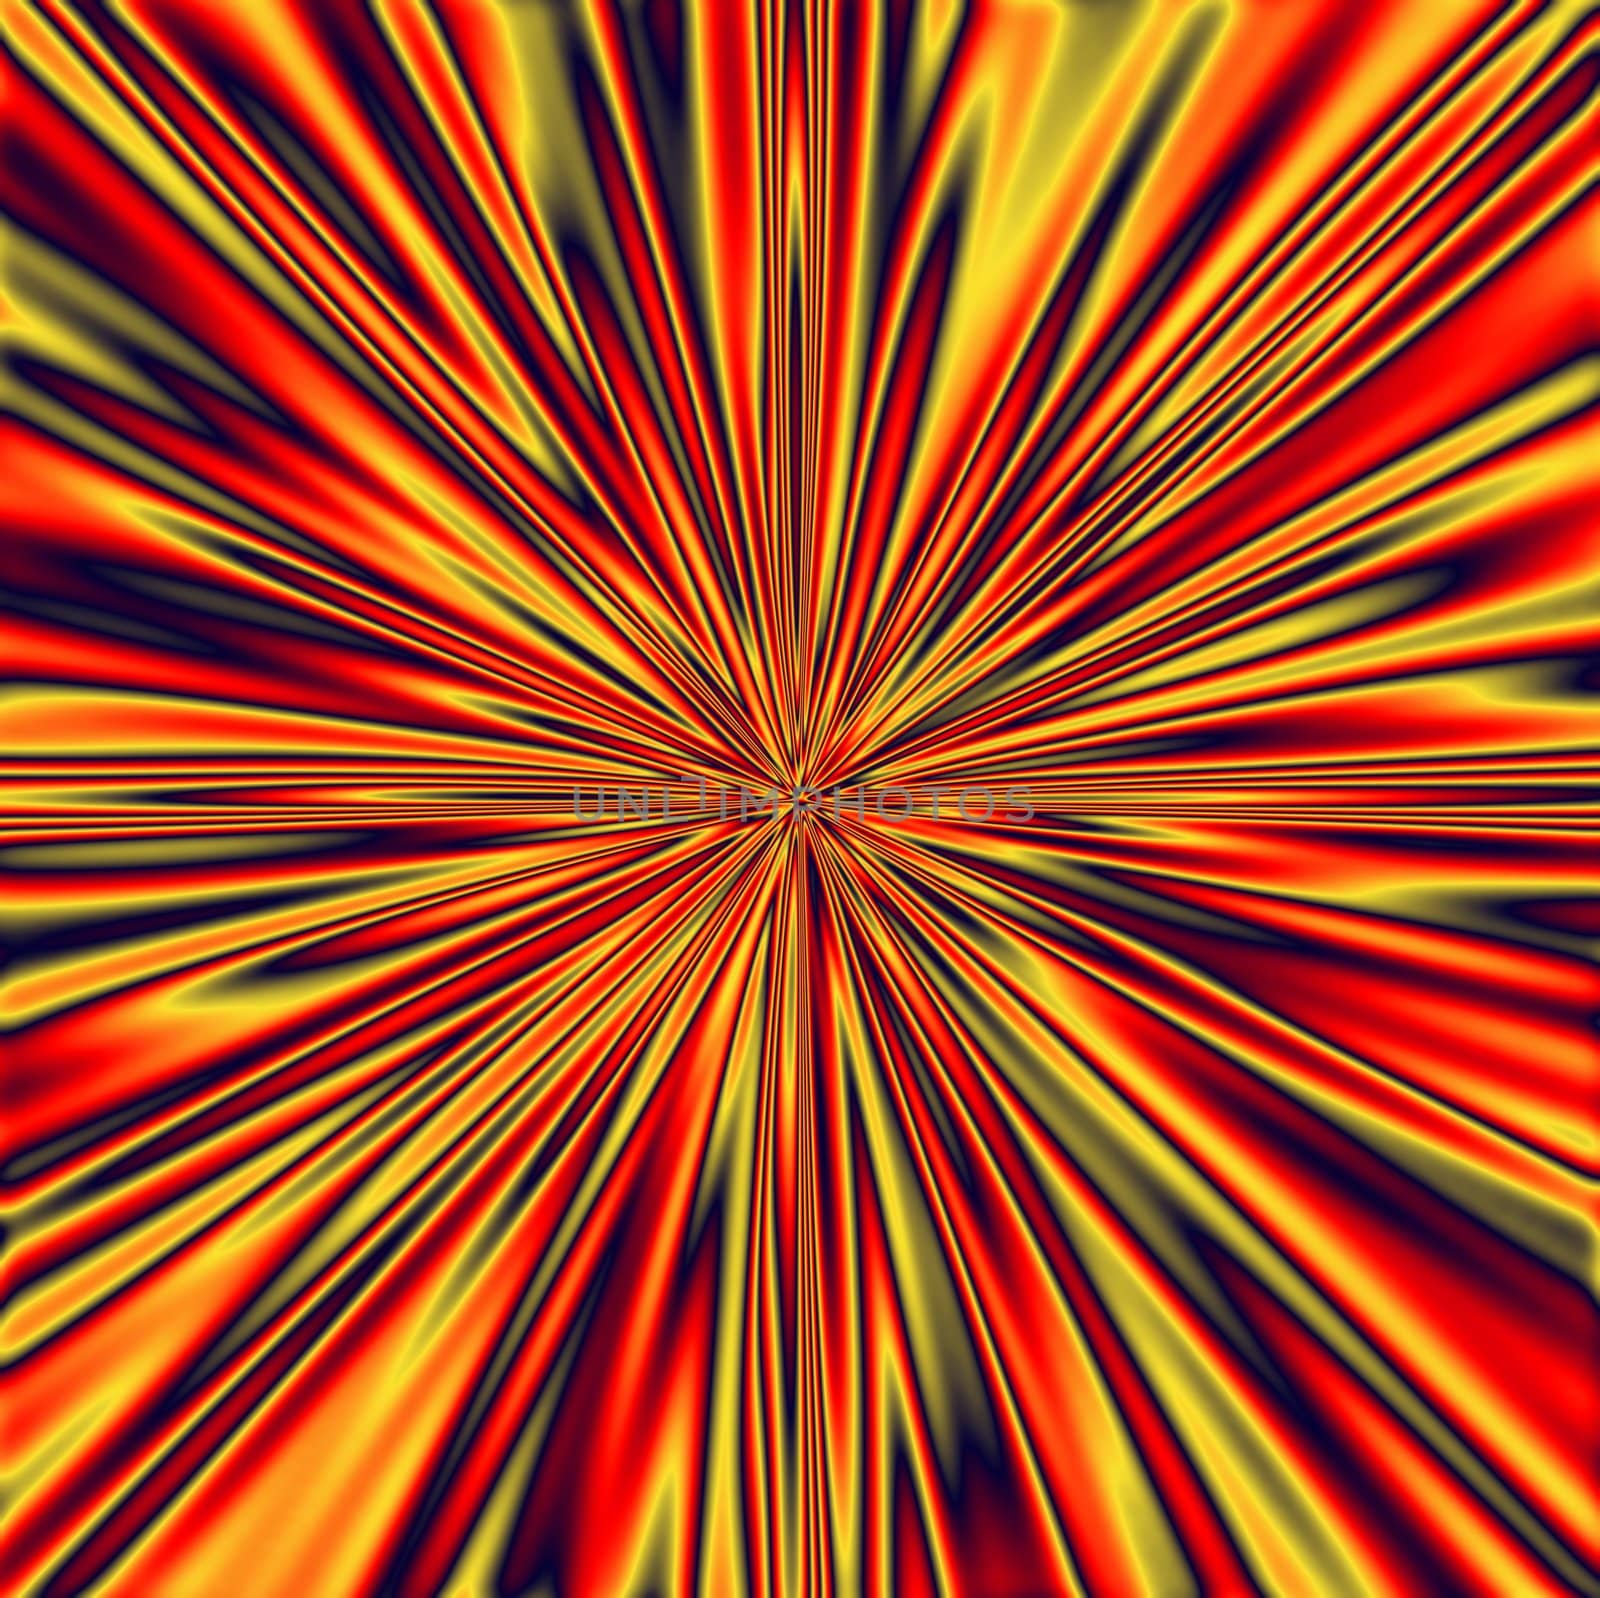 splashing abstract glowing red and yellow lines from the center